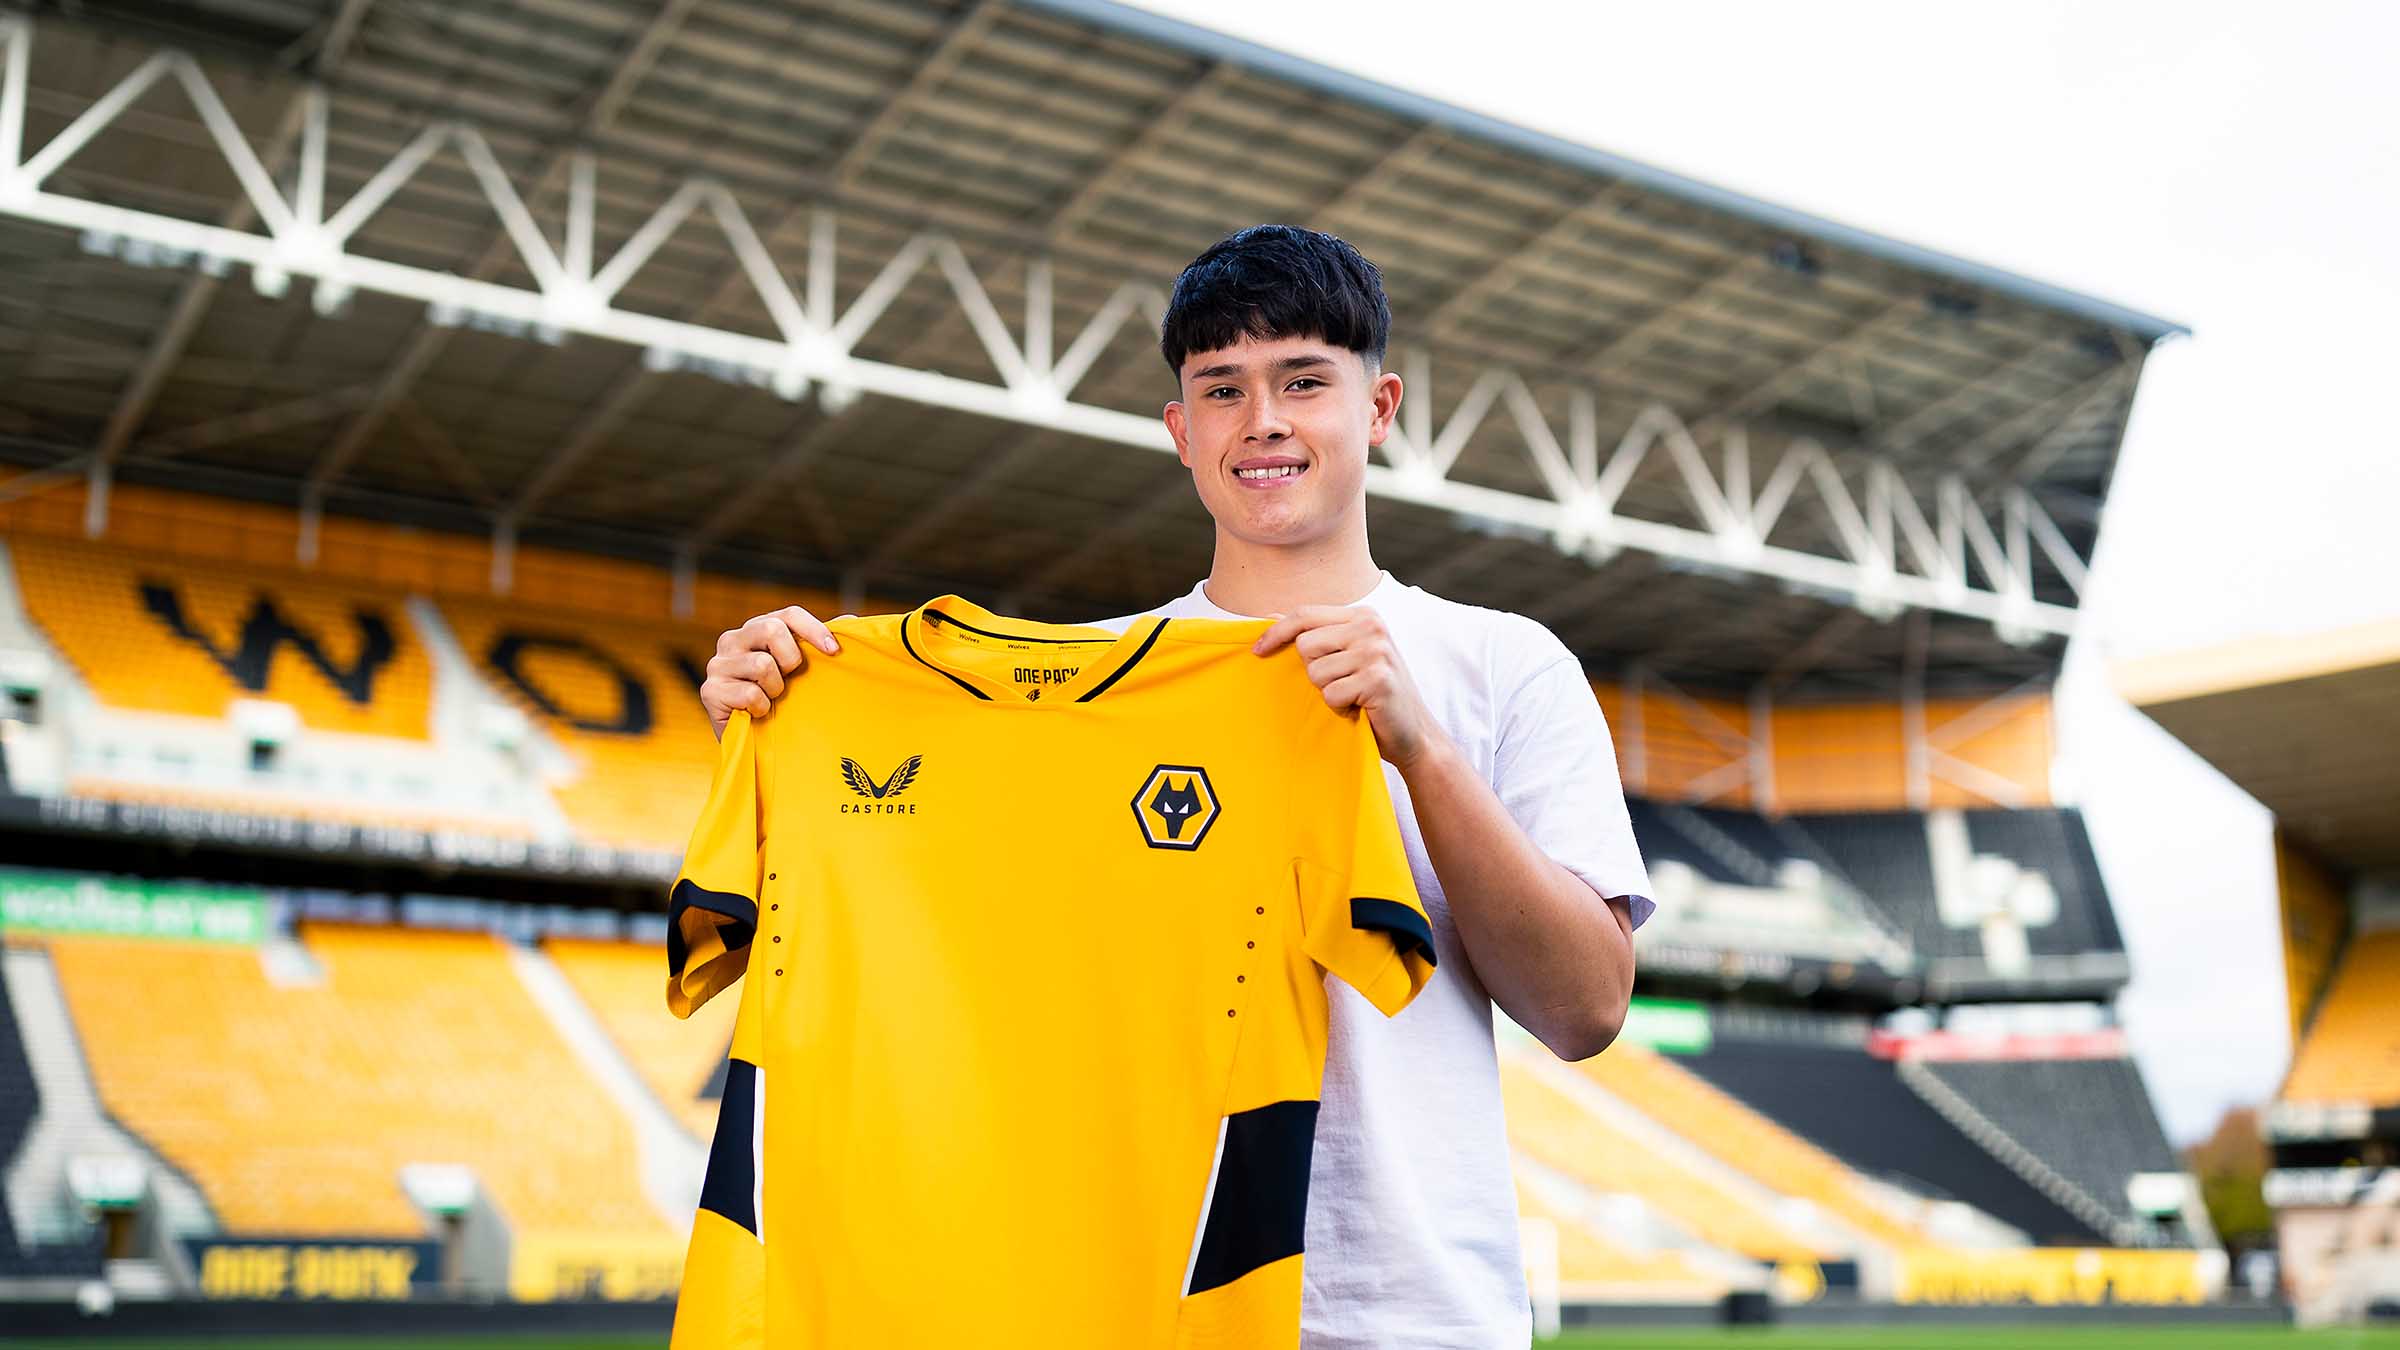 Harry Birtwistle signs with EPL team Wolves.